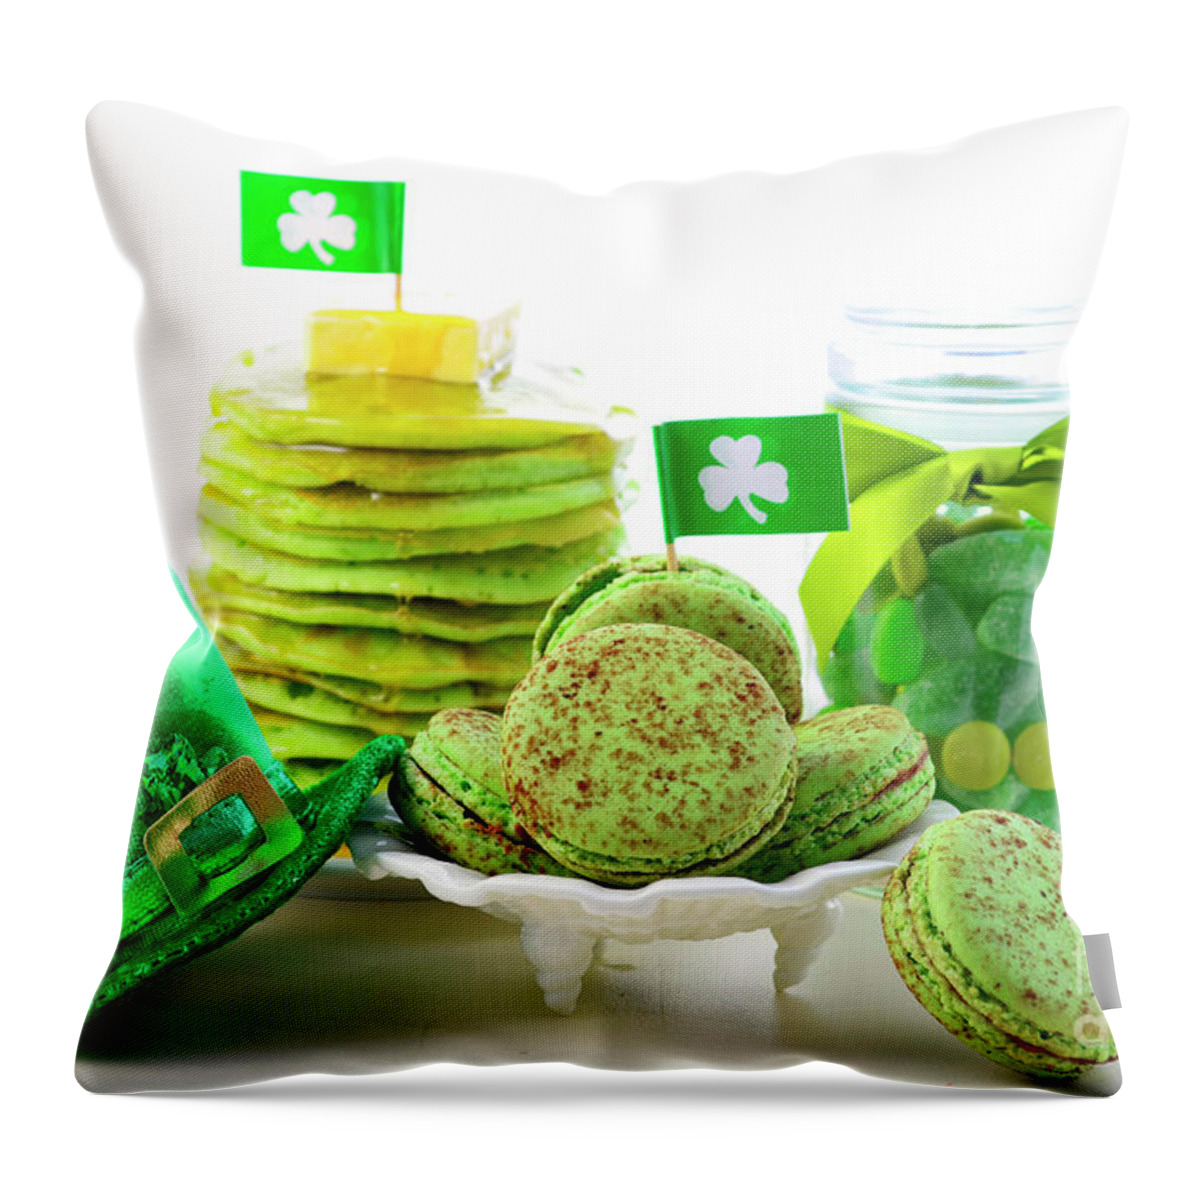 Biscuit Throw Pillow featuring the photograph St Patricks Day green party food. by Milleflore Images